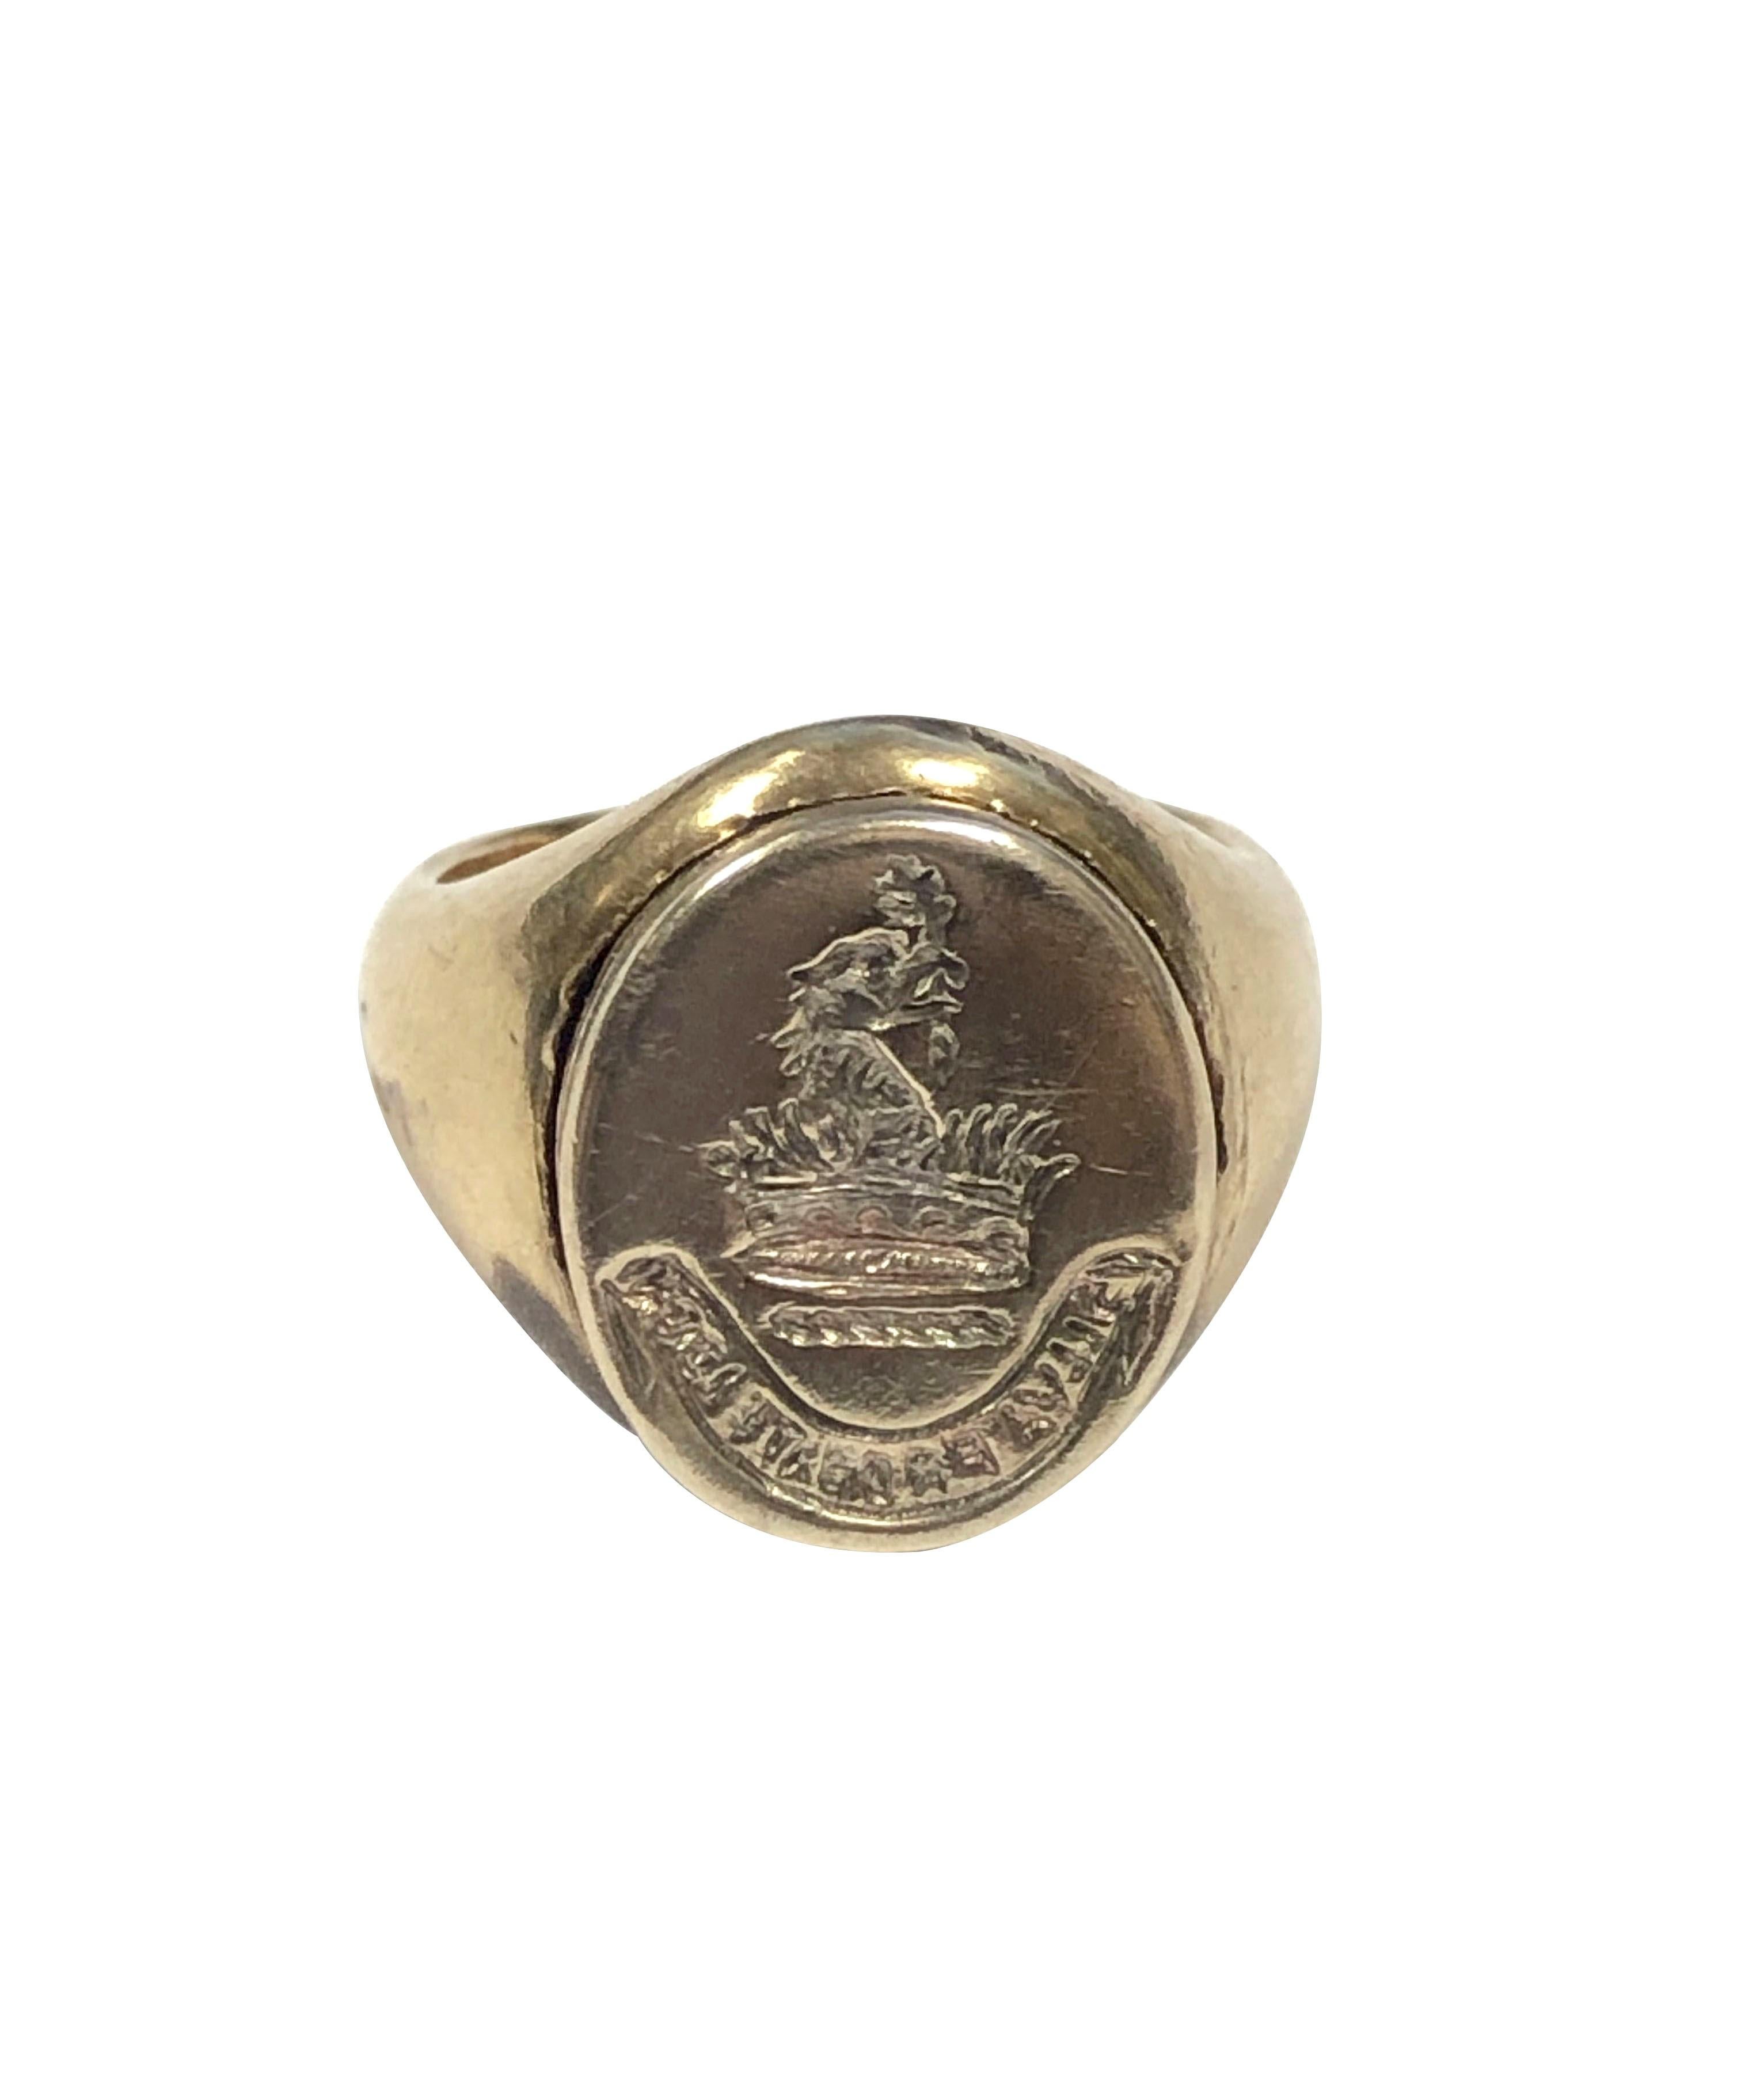 Circa 1910 14k Yellow Gold Signet Ring with hinged top Poison compartment. The top of the ring measures 9/16 X 1/2 inch and has a deep Signet Crest, nice thick solid construction and weighing 8.8 Grams. Finger size 3 1/2 and can be sized up a bit. 